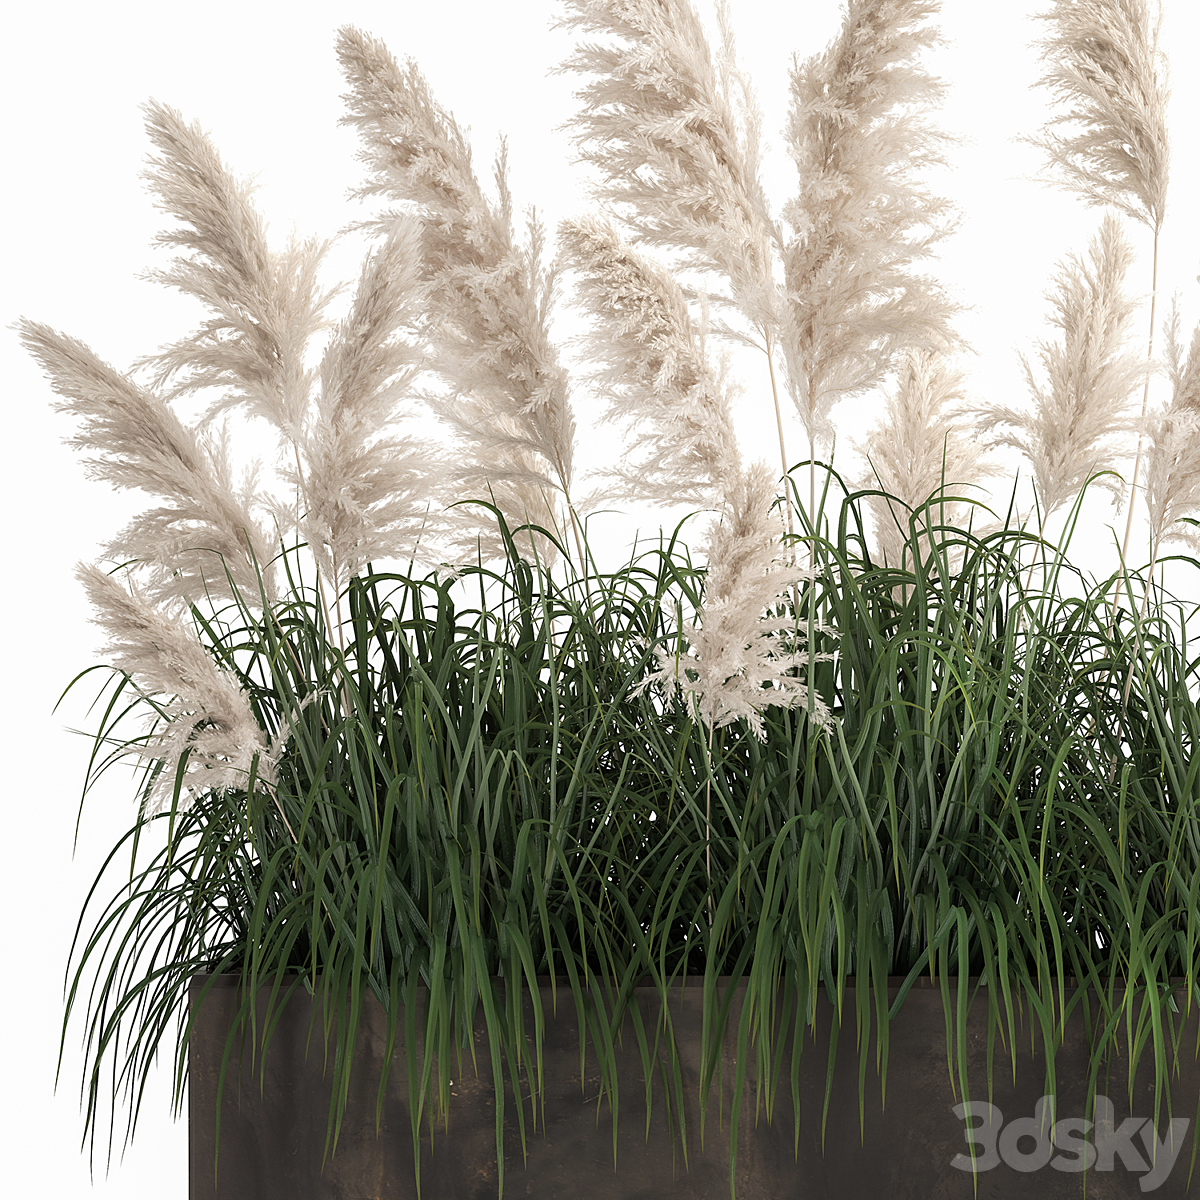 Bush white pampas grass in a street rusty metal pot, white reed, Cortaderia. 1033.